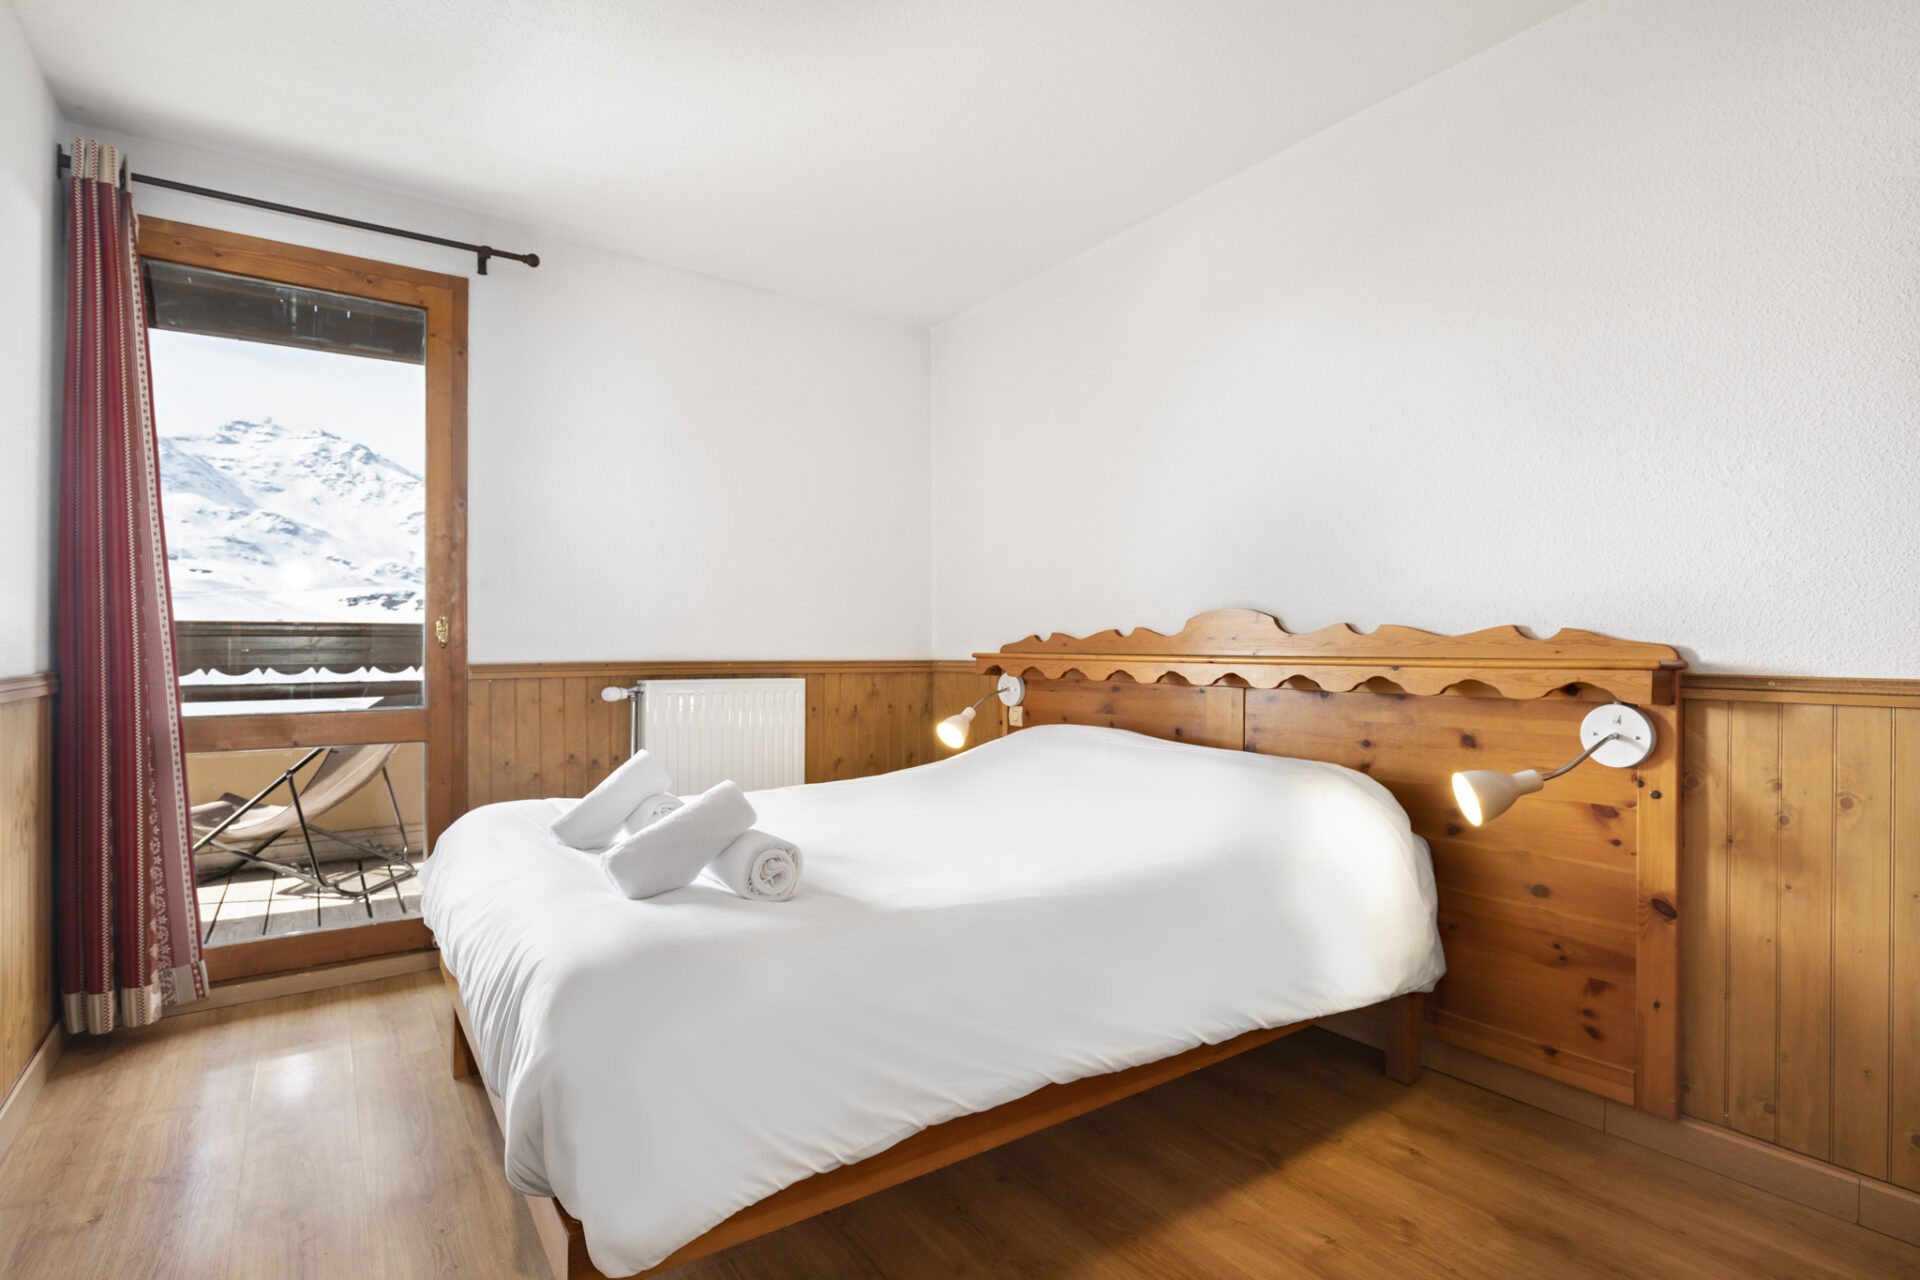 An image of one of the double bedrooms at Les Balcons de Val Thorens